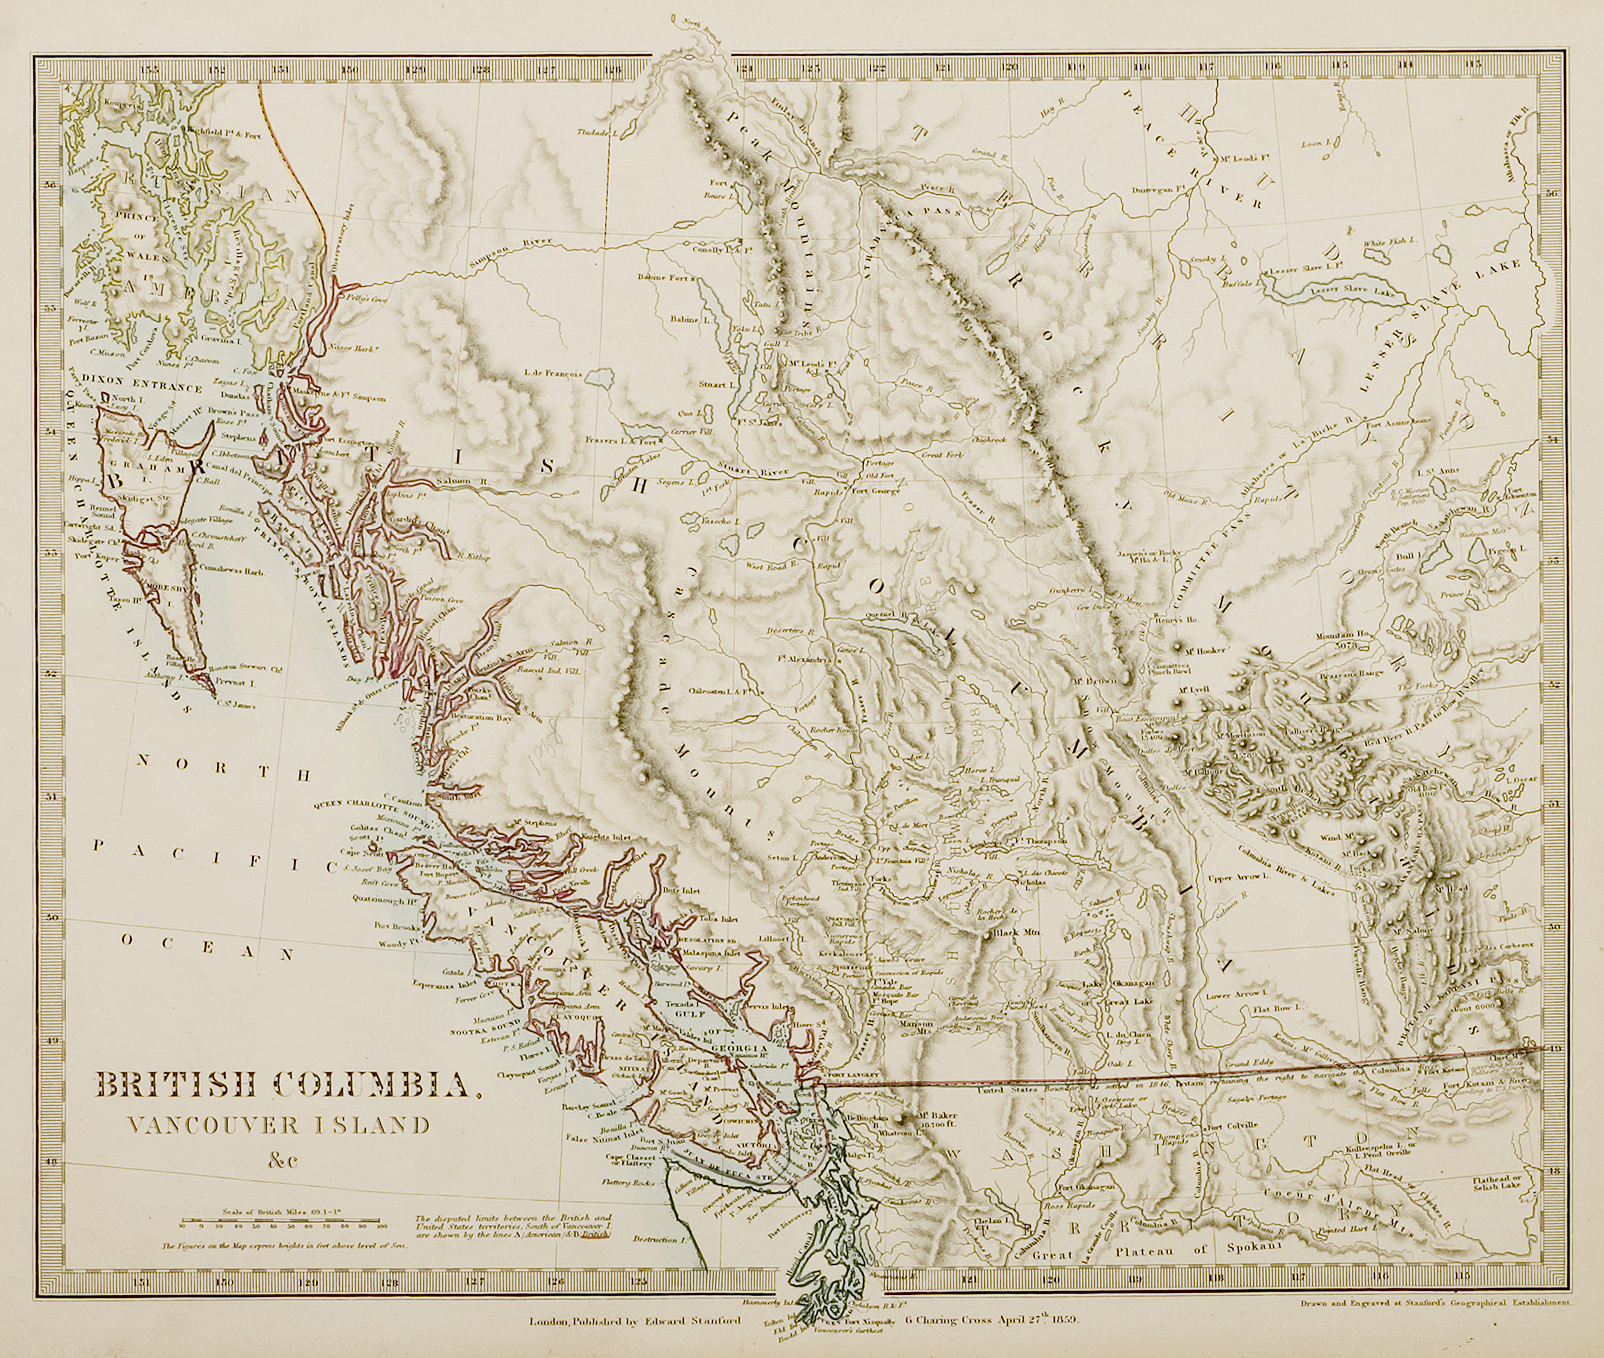 British Columbia, Vancouver Island - Antique Print from 1859